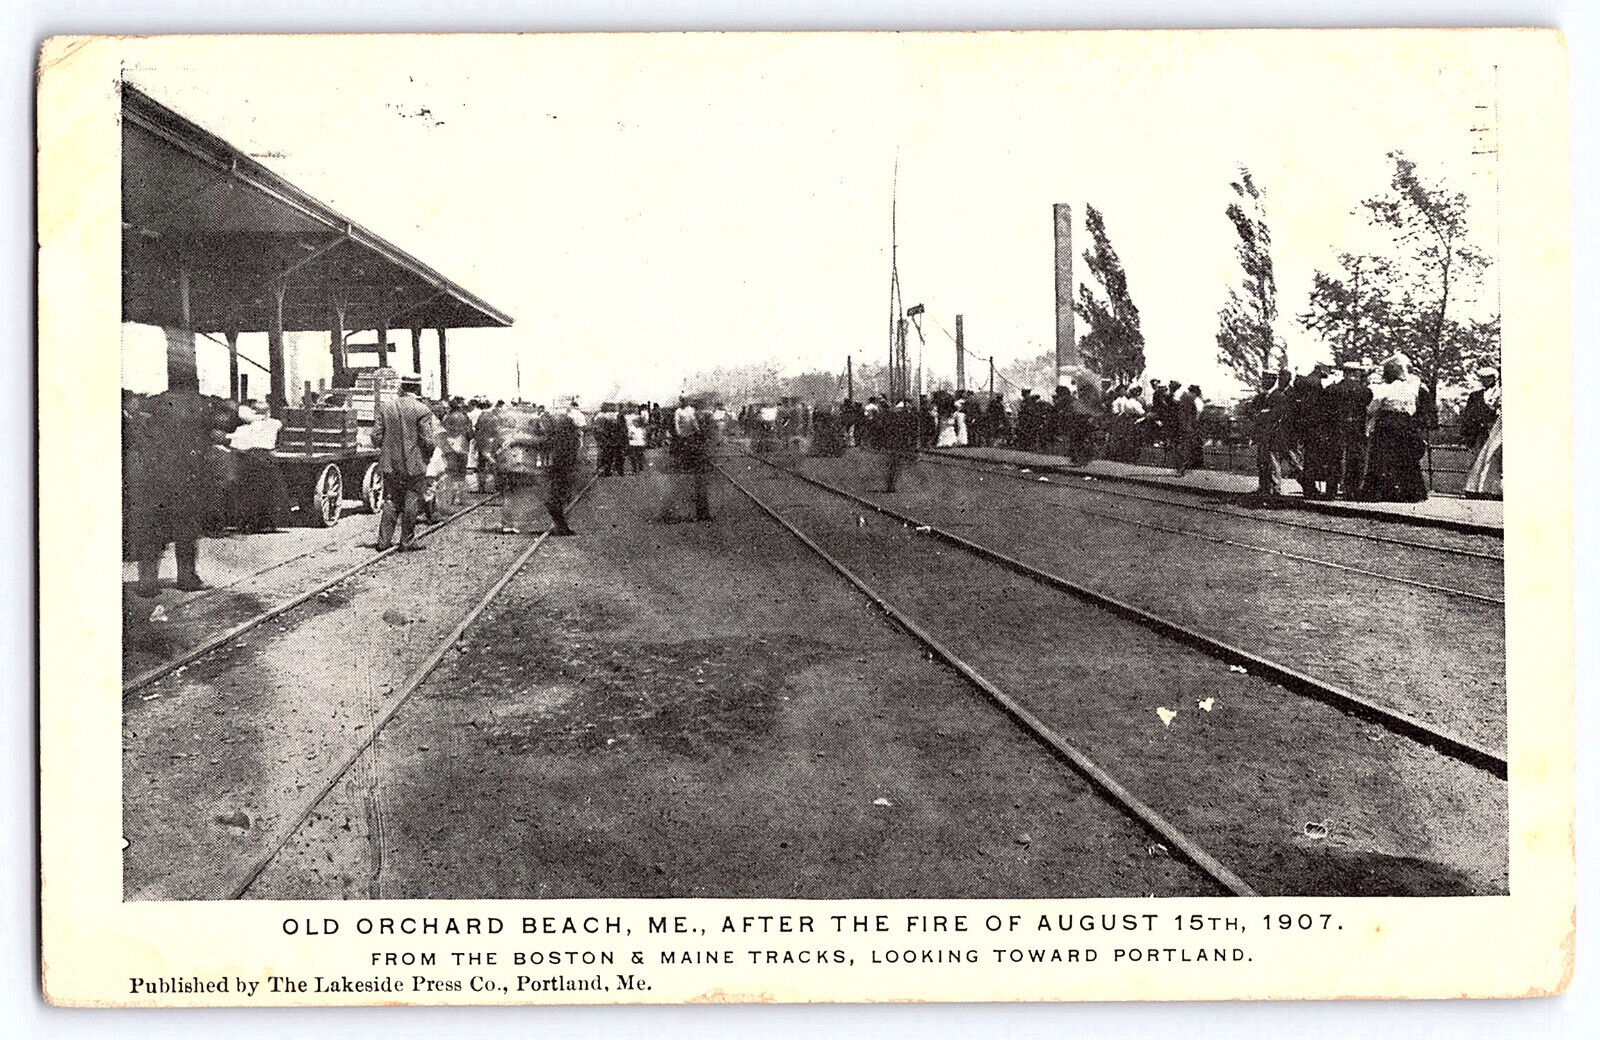 Old Orchard Beach After Fire August 1907 Boston Maine Railroad tracks Postcard